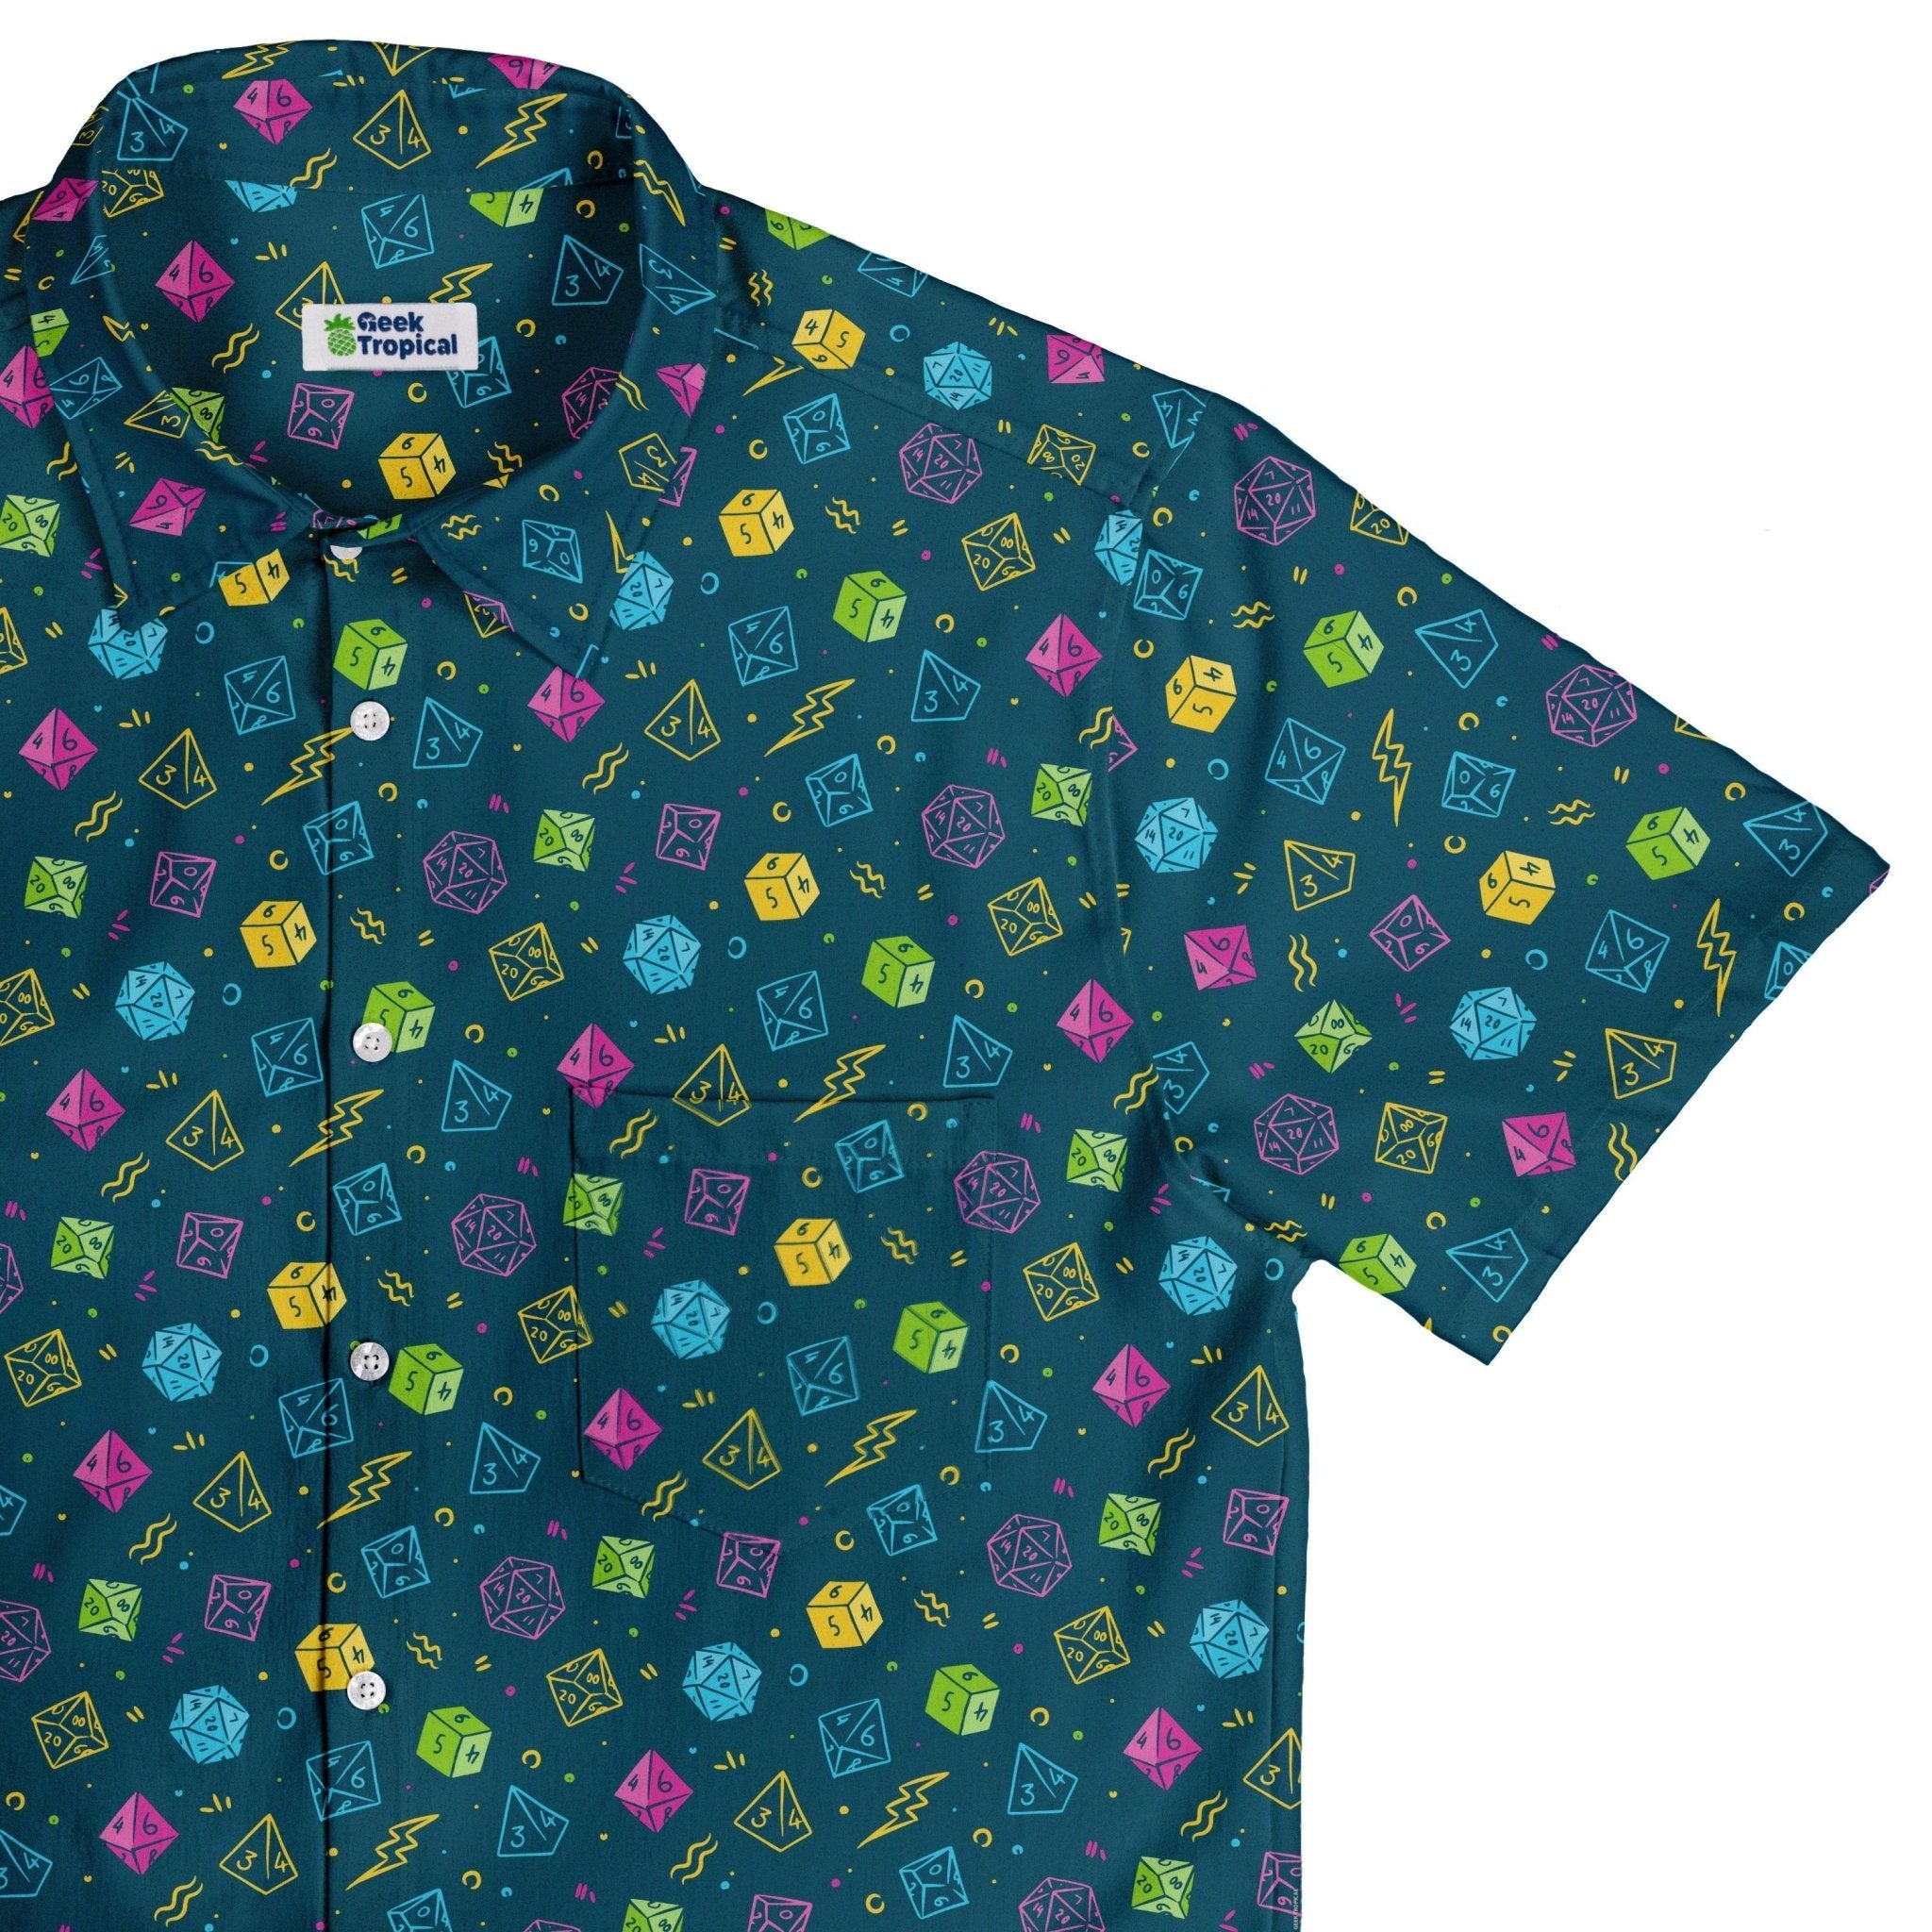 Ready-to-Ship Dnd RPG Dice Blue Button Up Shirt - adult sizing - dnd & rpg print - Maximalist Patterns